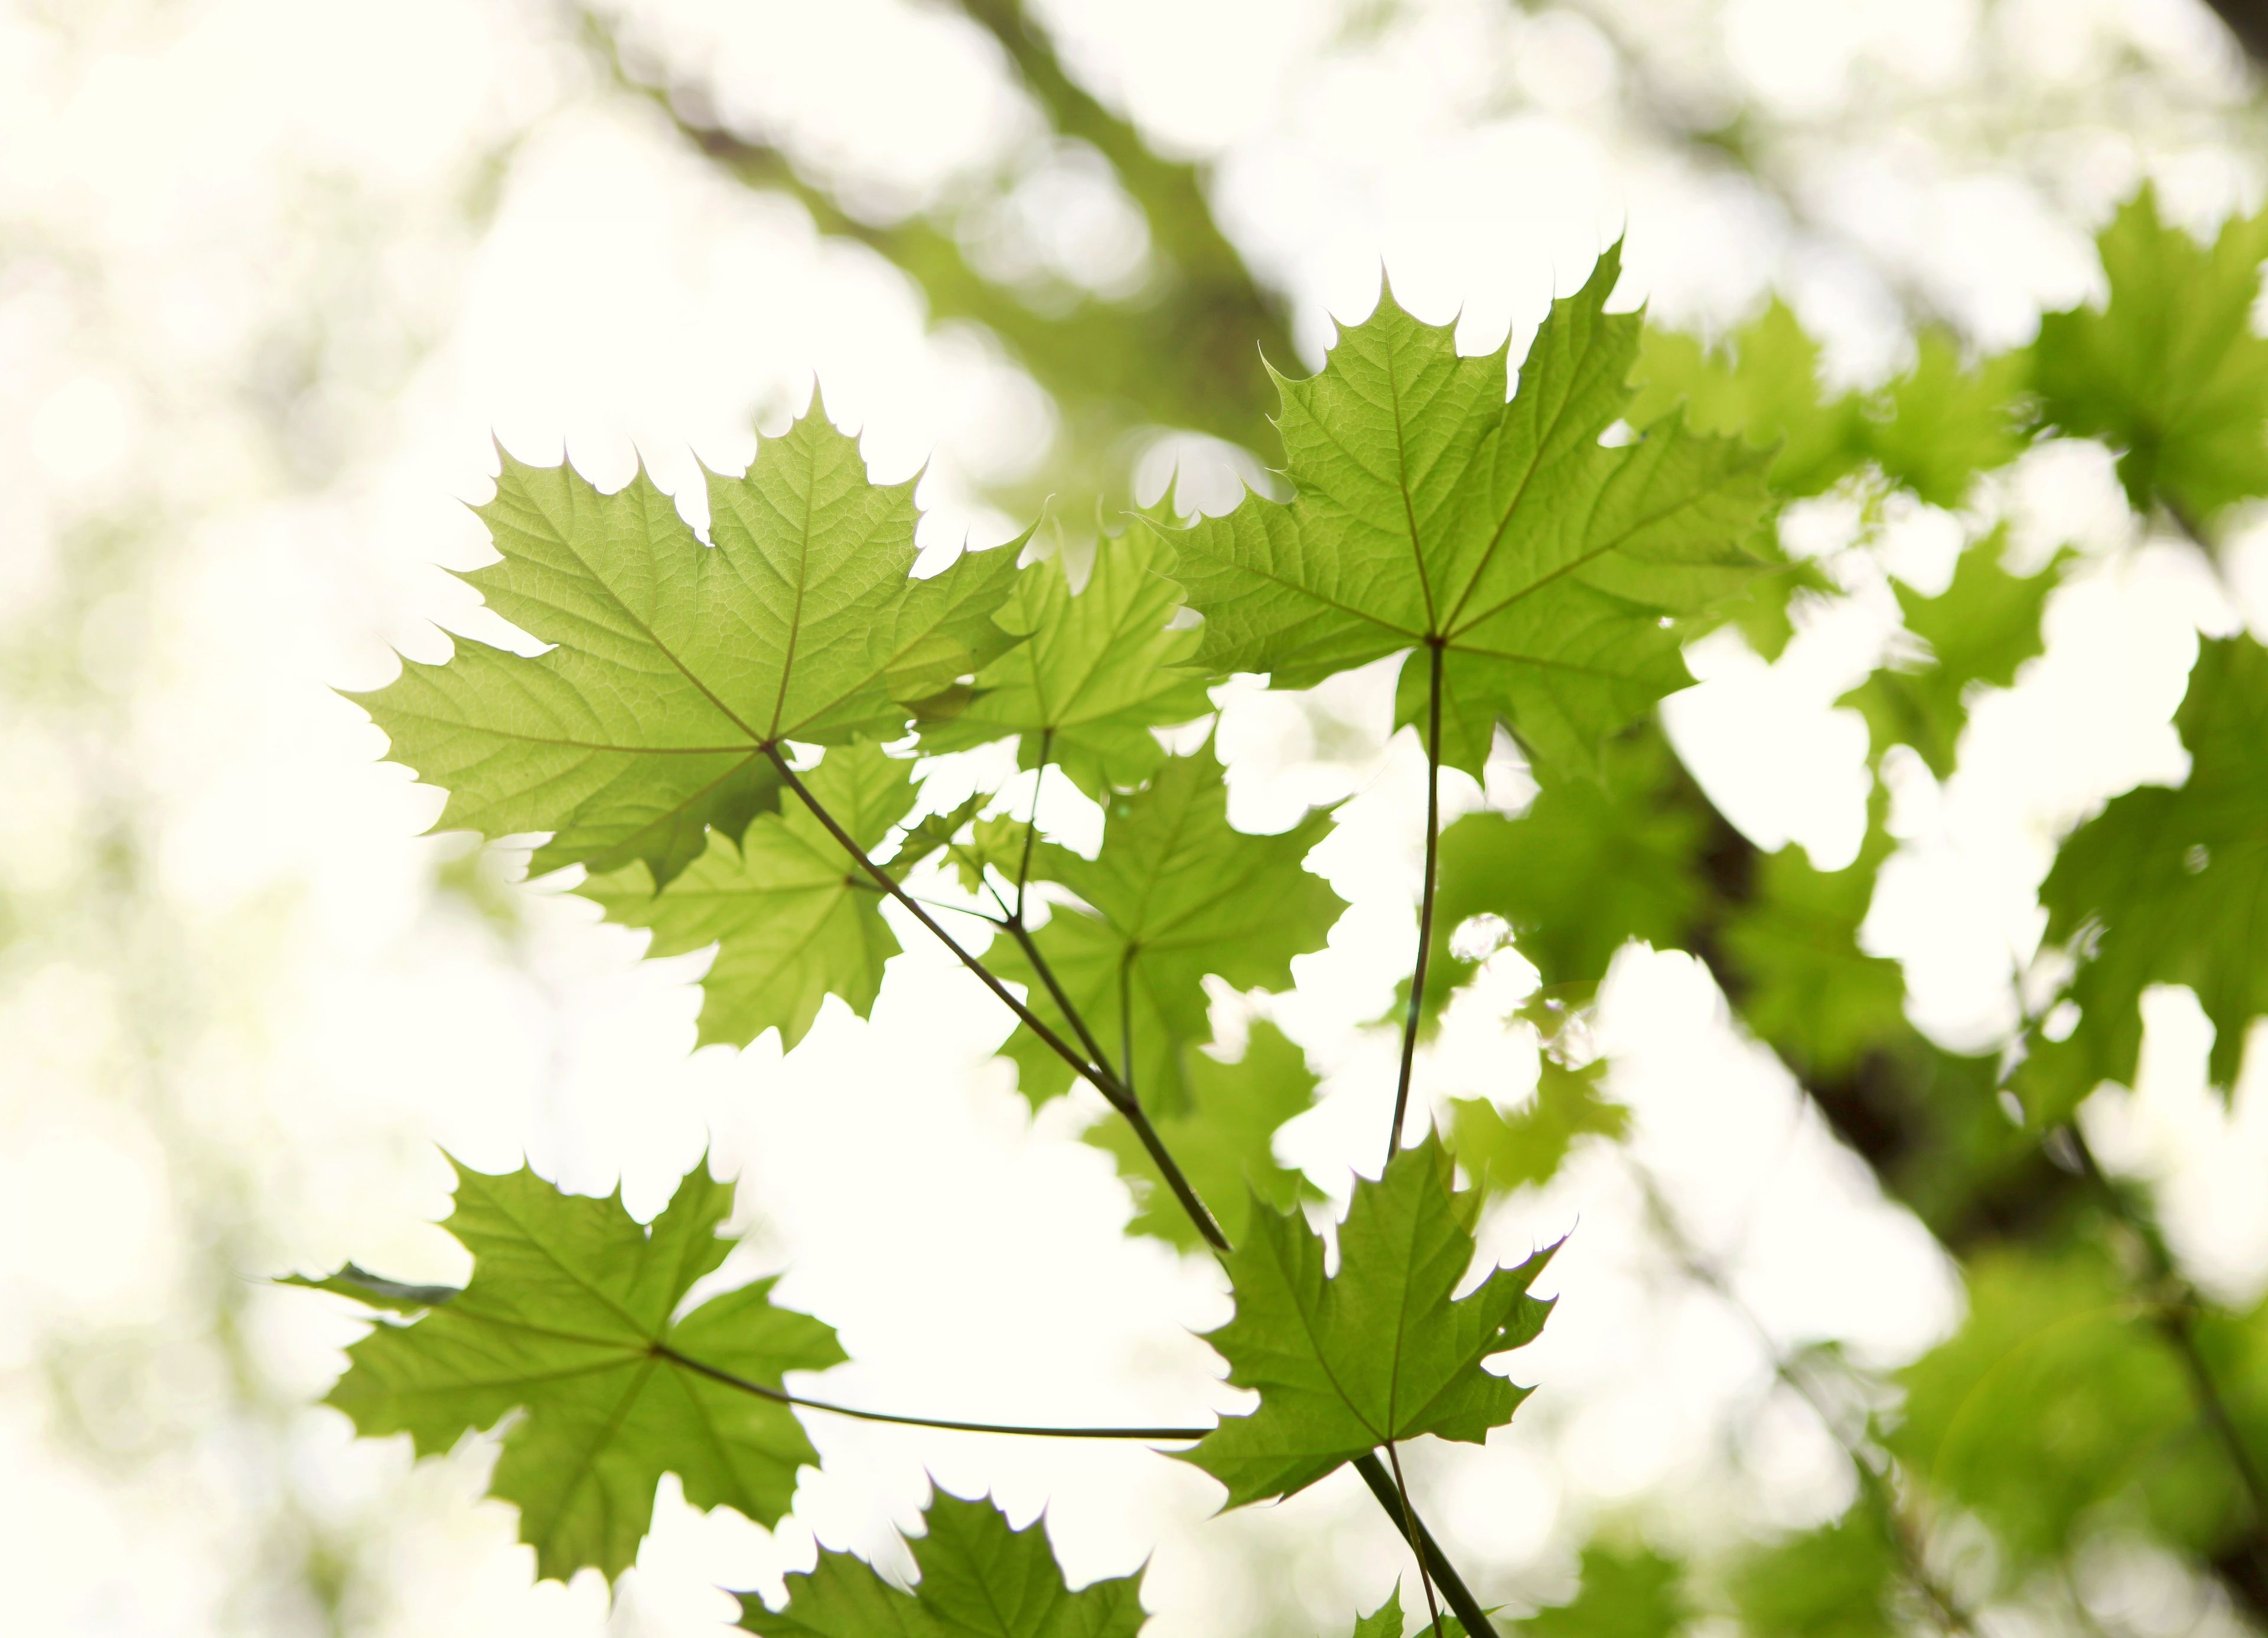 Maple leaves in the spring.